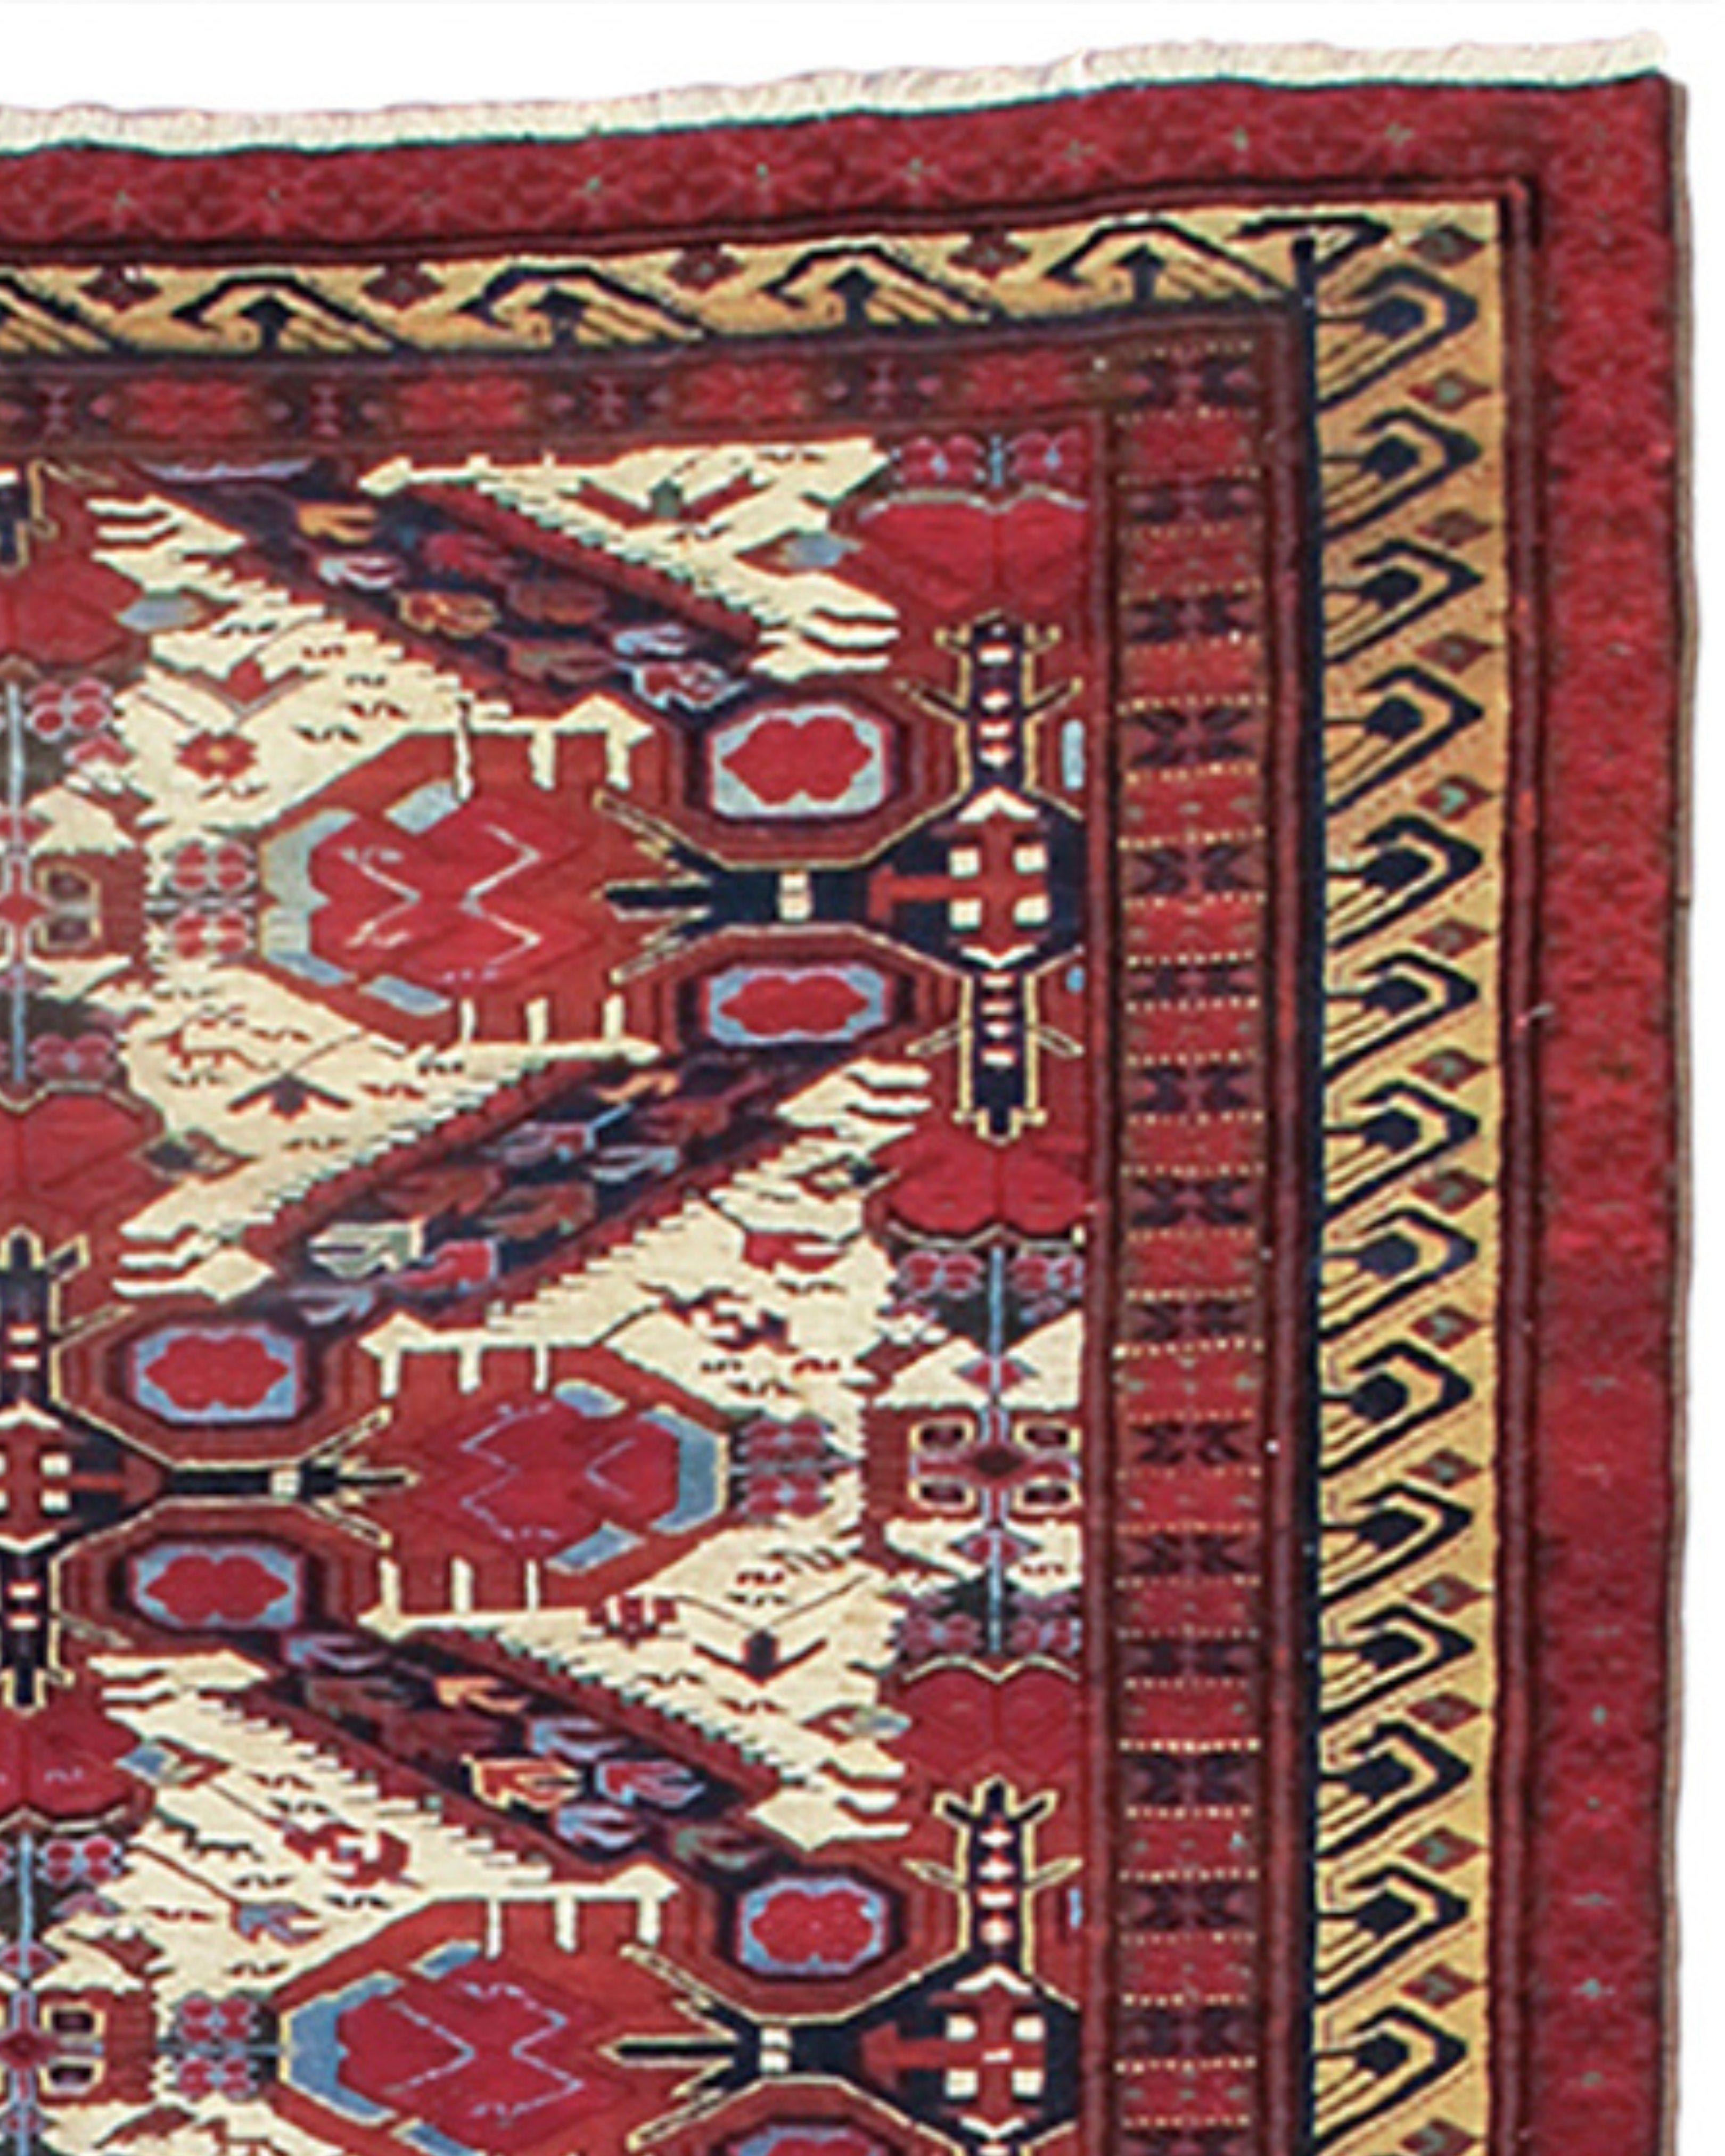 Seichor Kuba Rug, Early 20th Century

Additional information:
Dimensions: 4'10